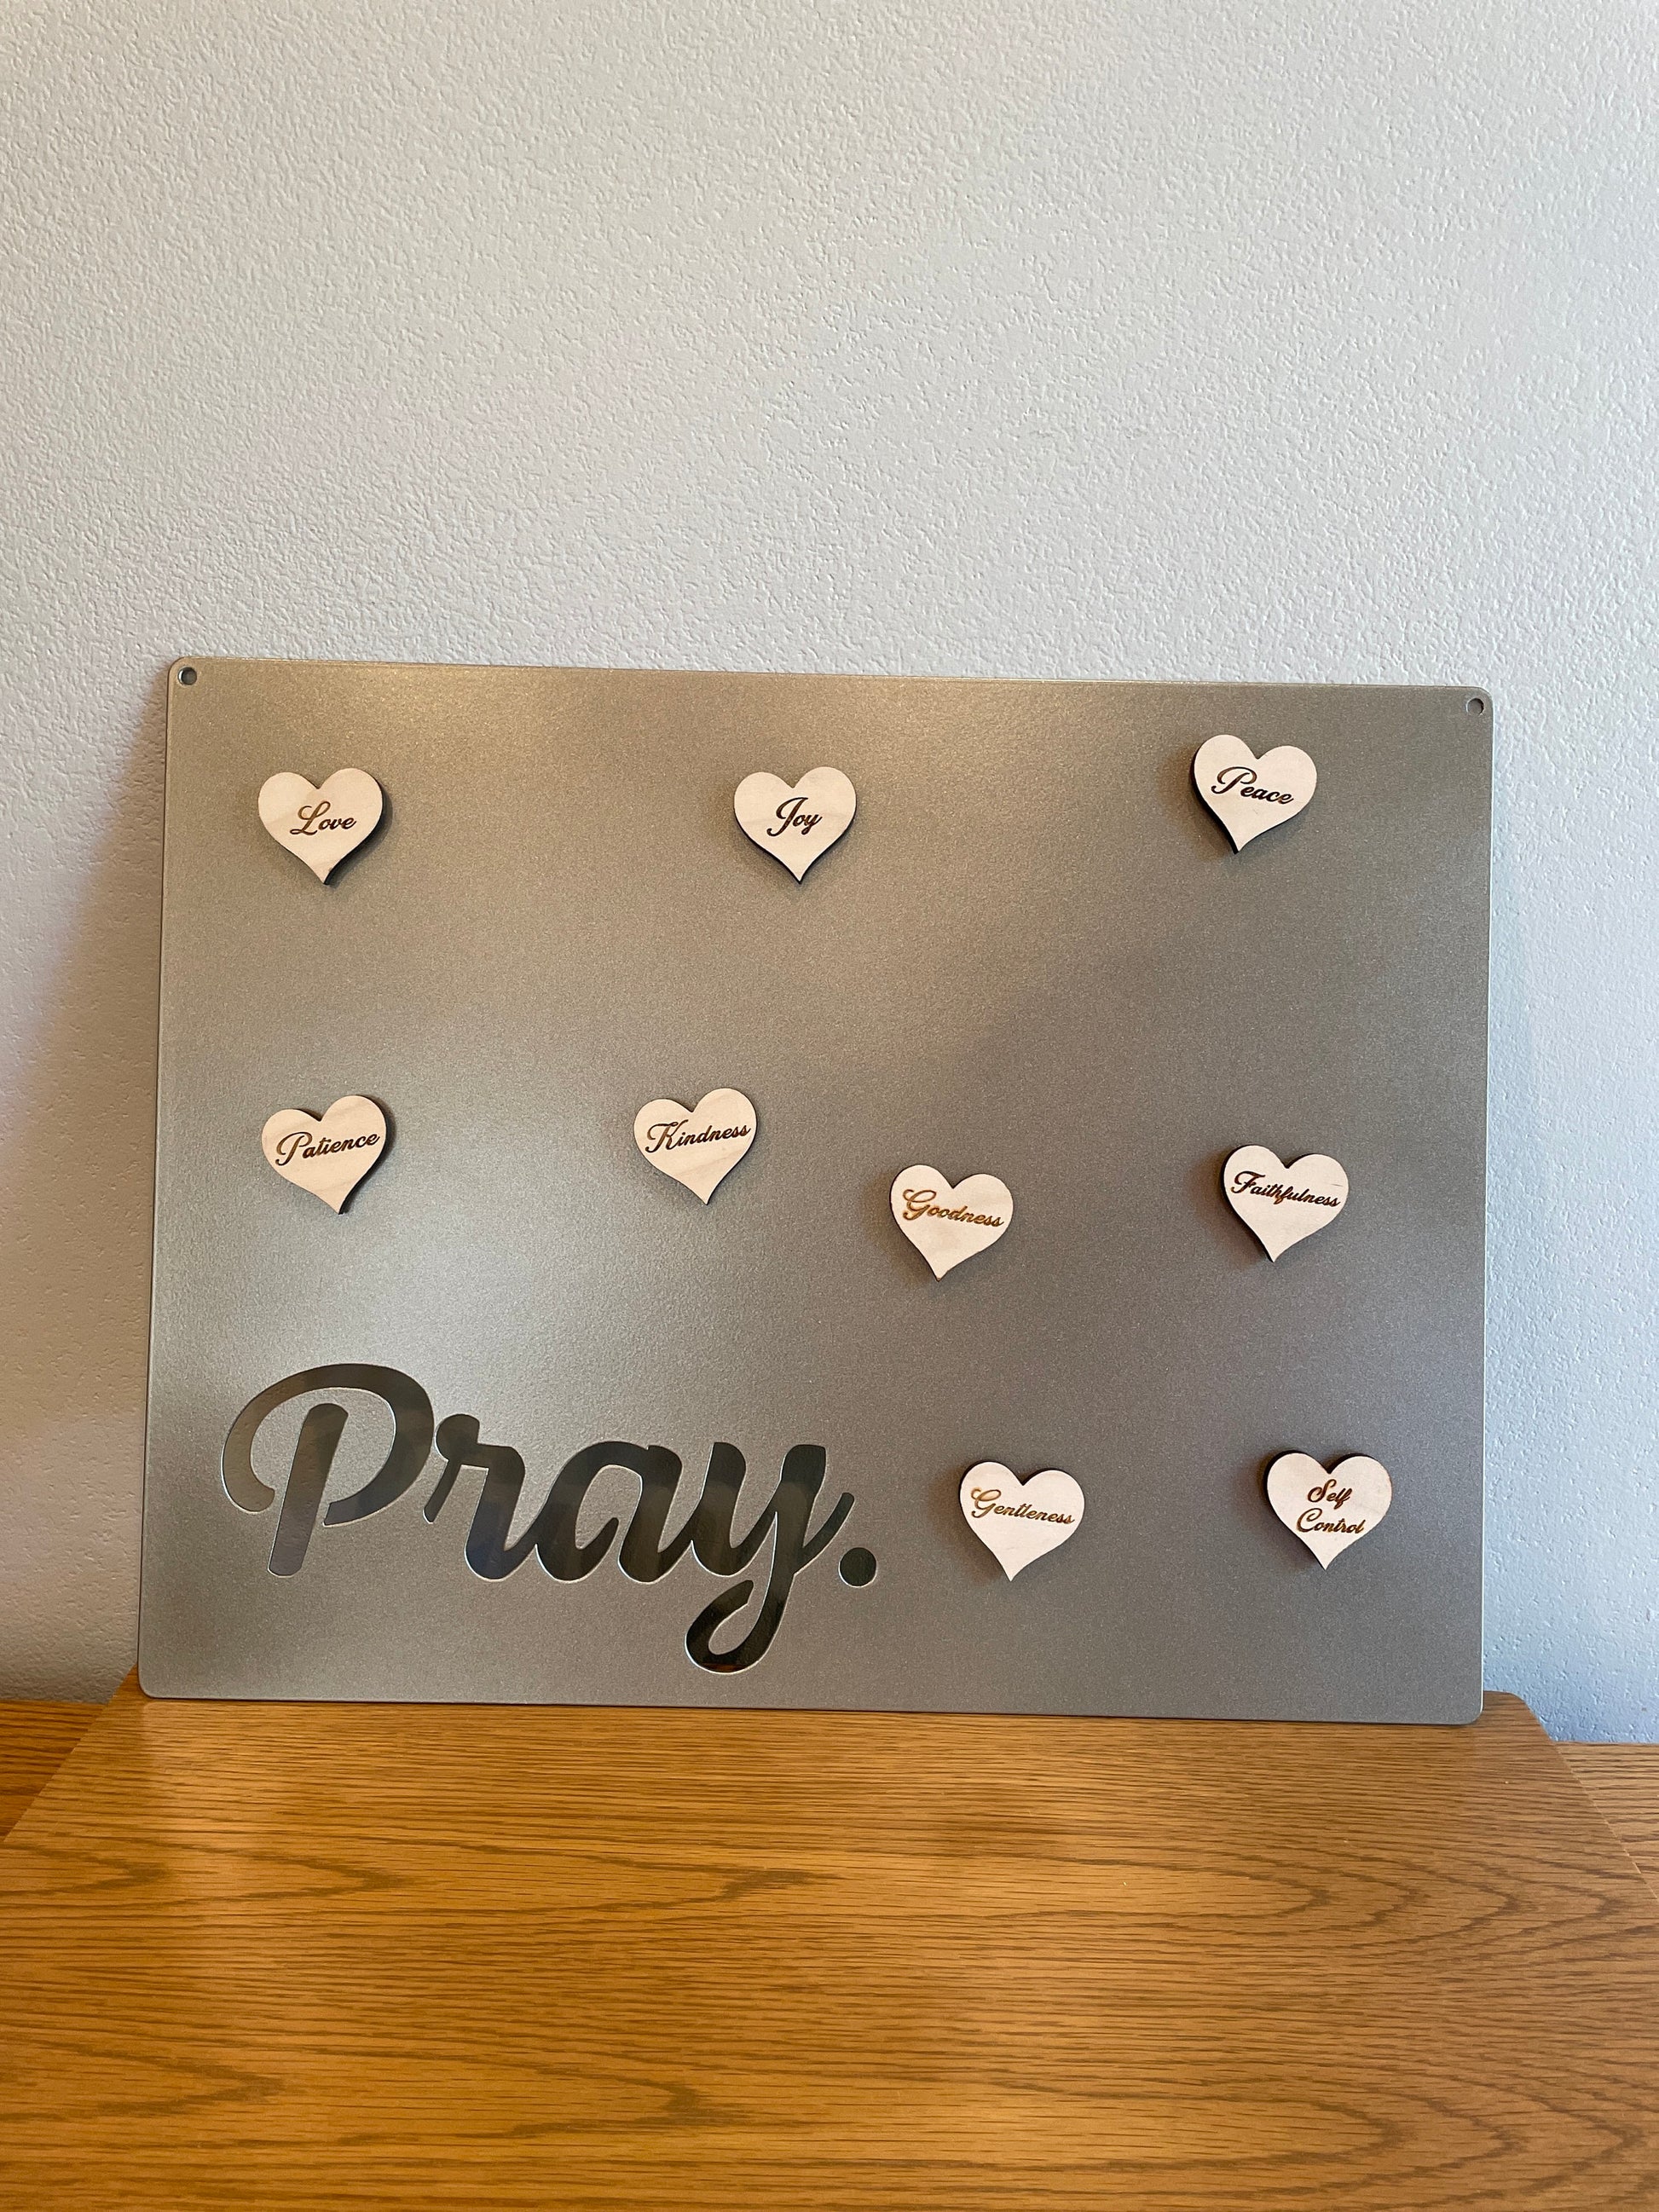 Magnetic Prayer Board, Magnetic Board for Wall, Magnetic Note Board, Pray for Missionaries, Faith Bulletin Board, Praying Without Ceasing